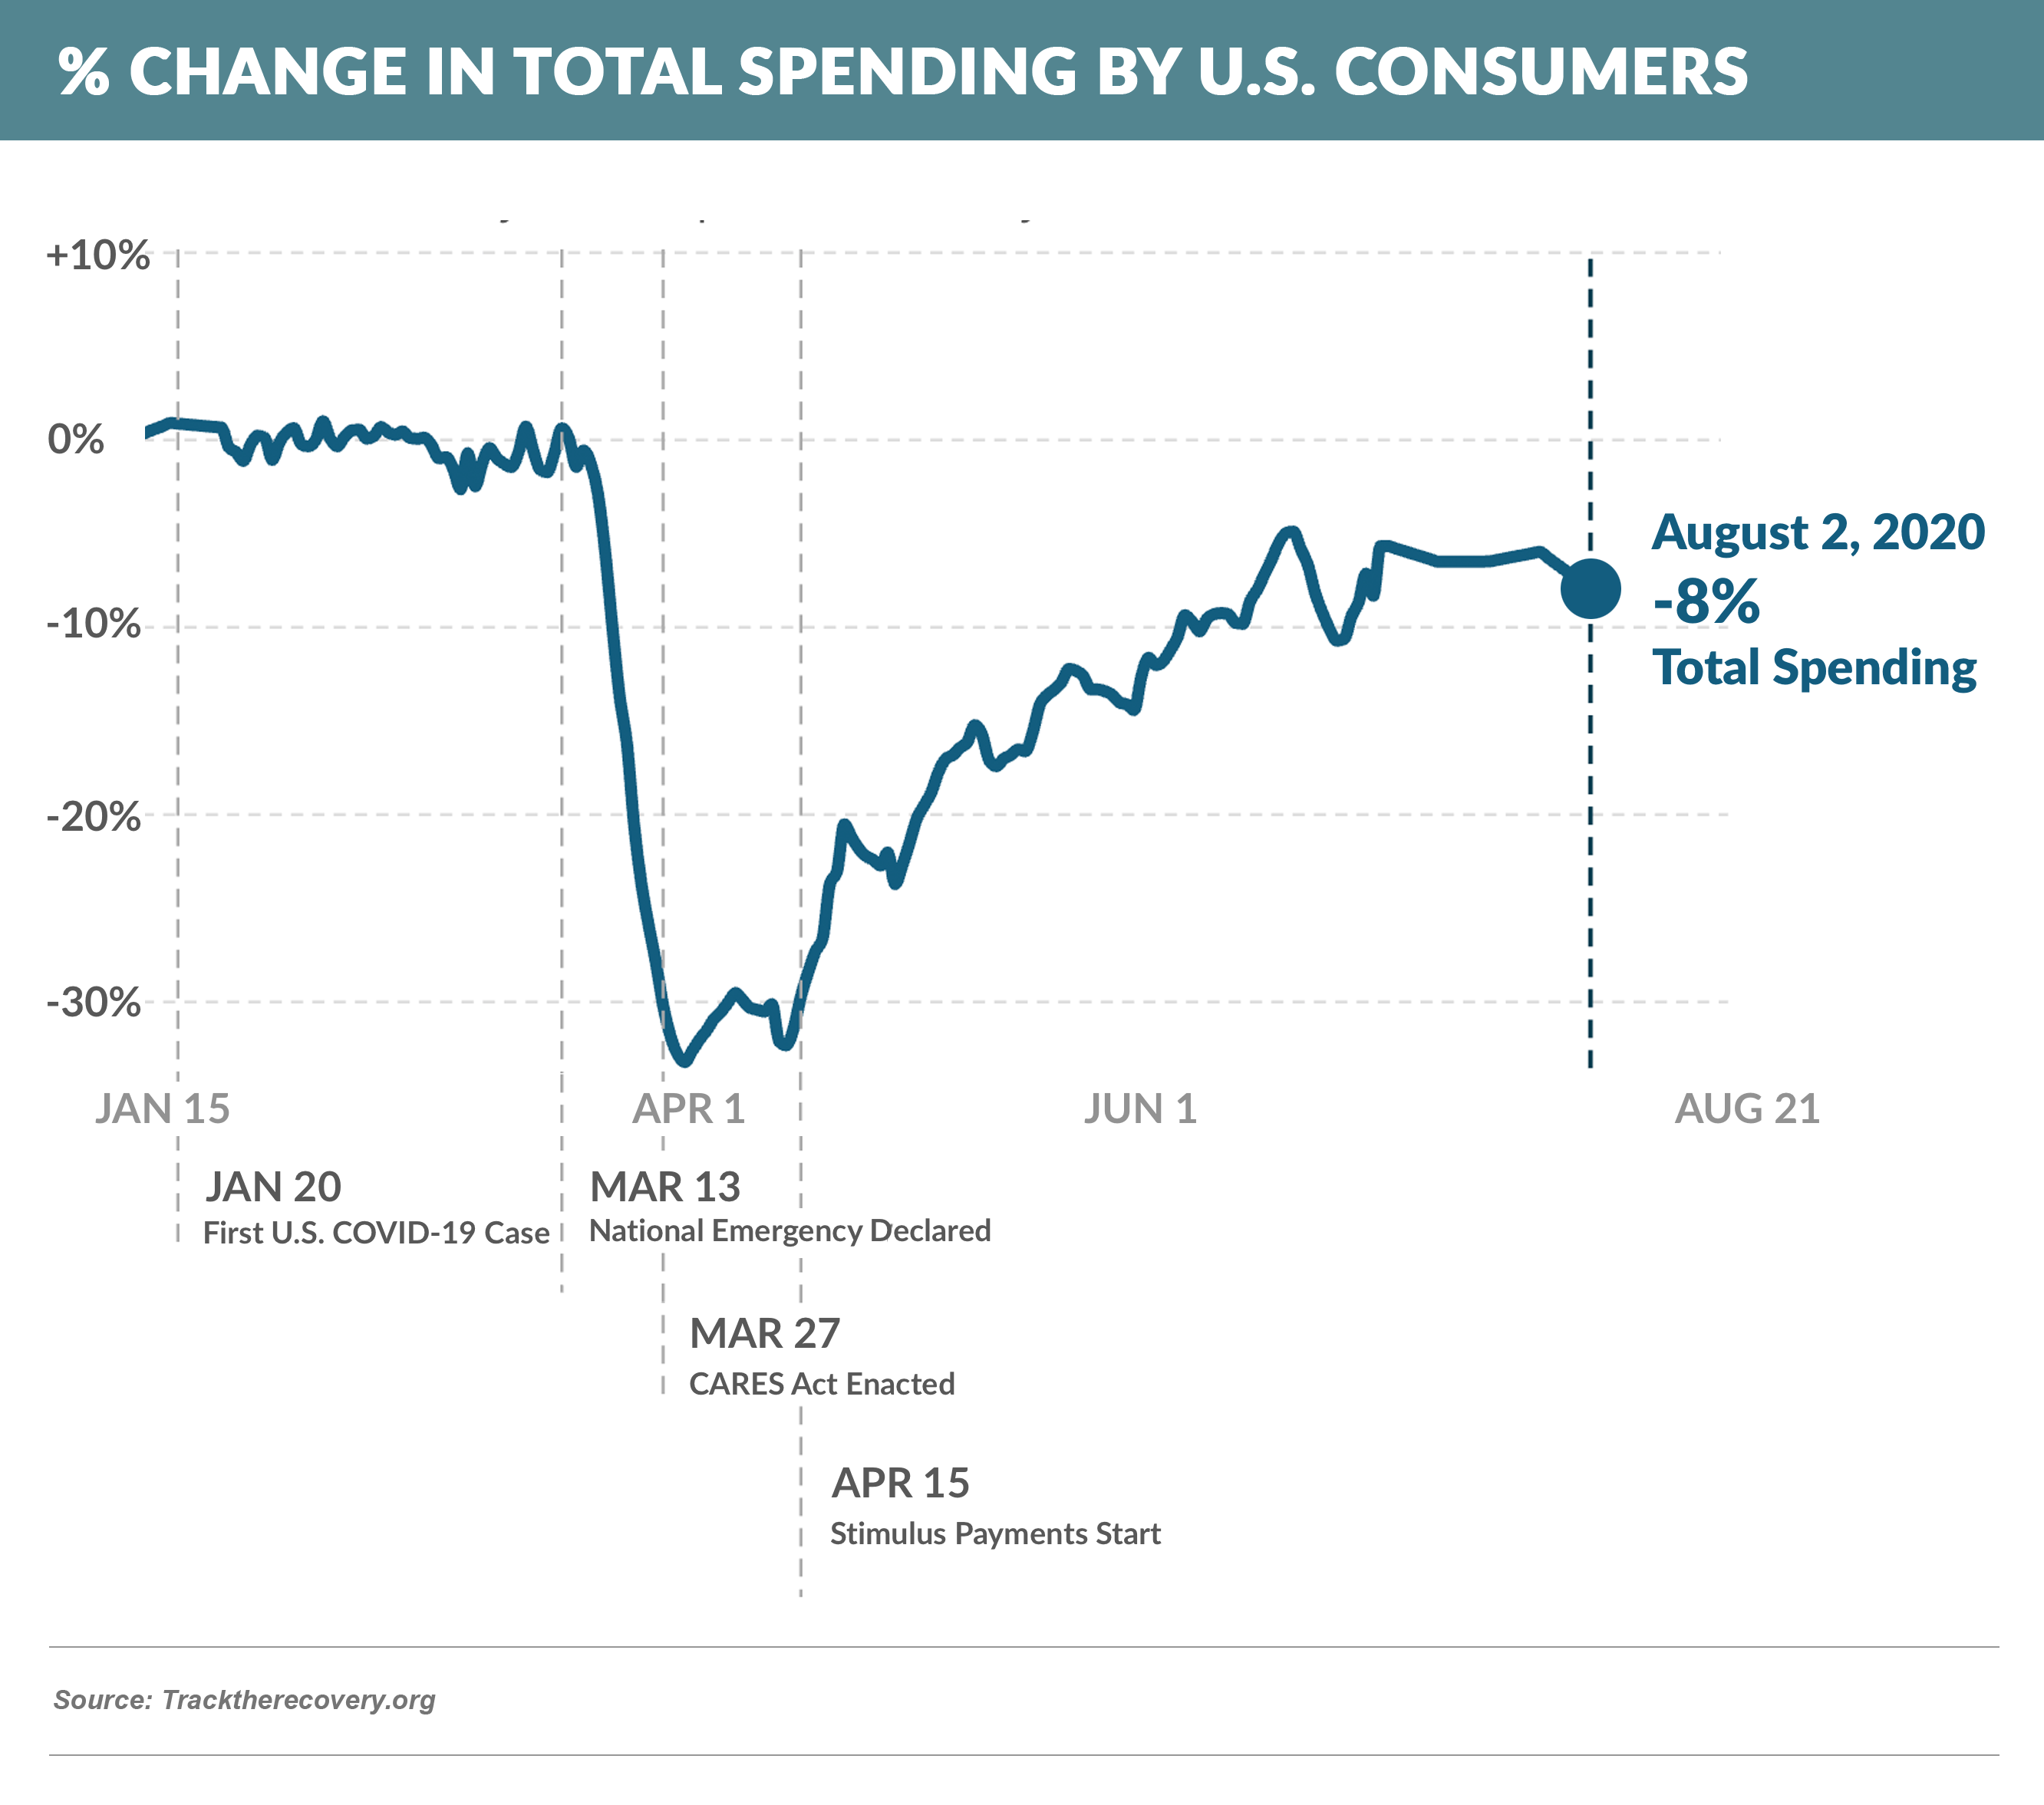 % Change in Total Spending by U.S. Consumers